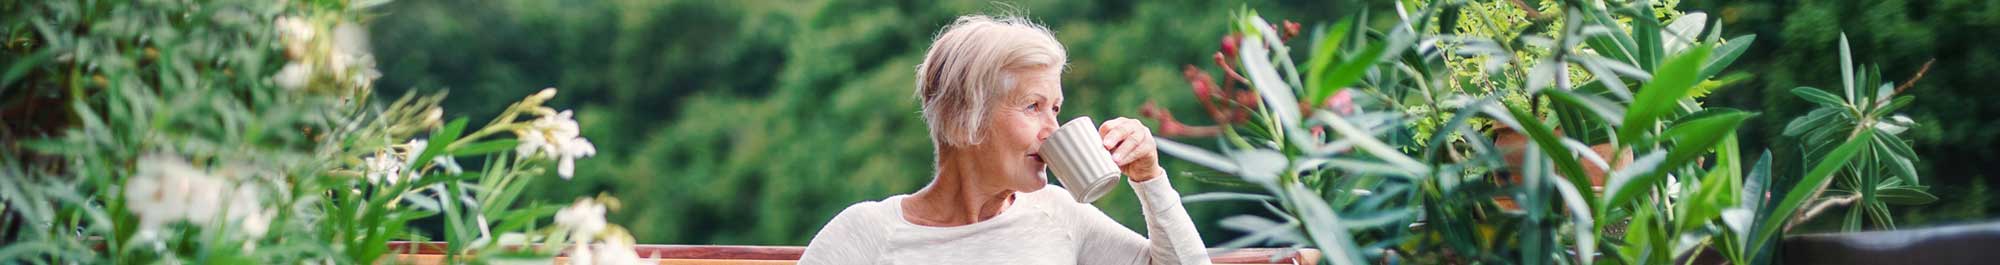 woman serenely drinking coffee on her patio